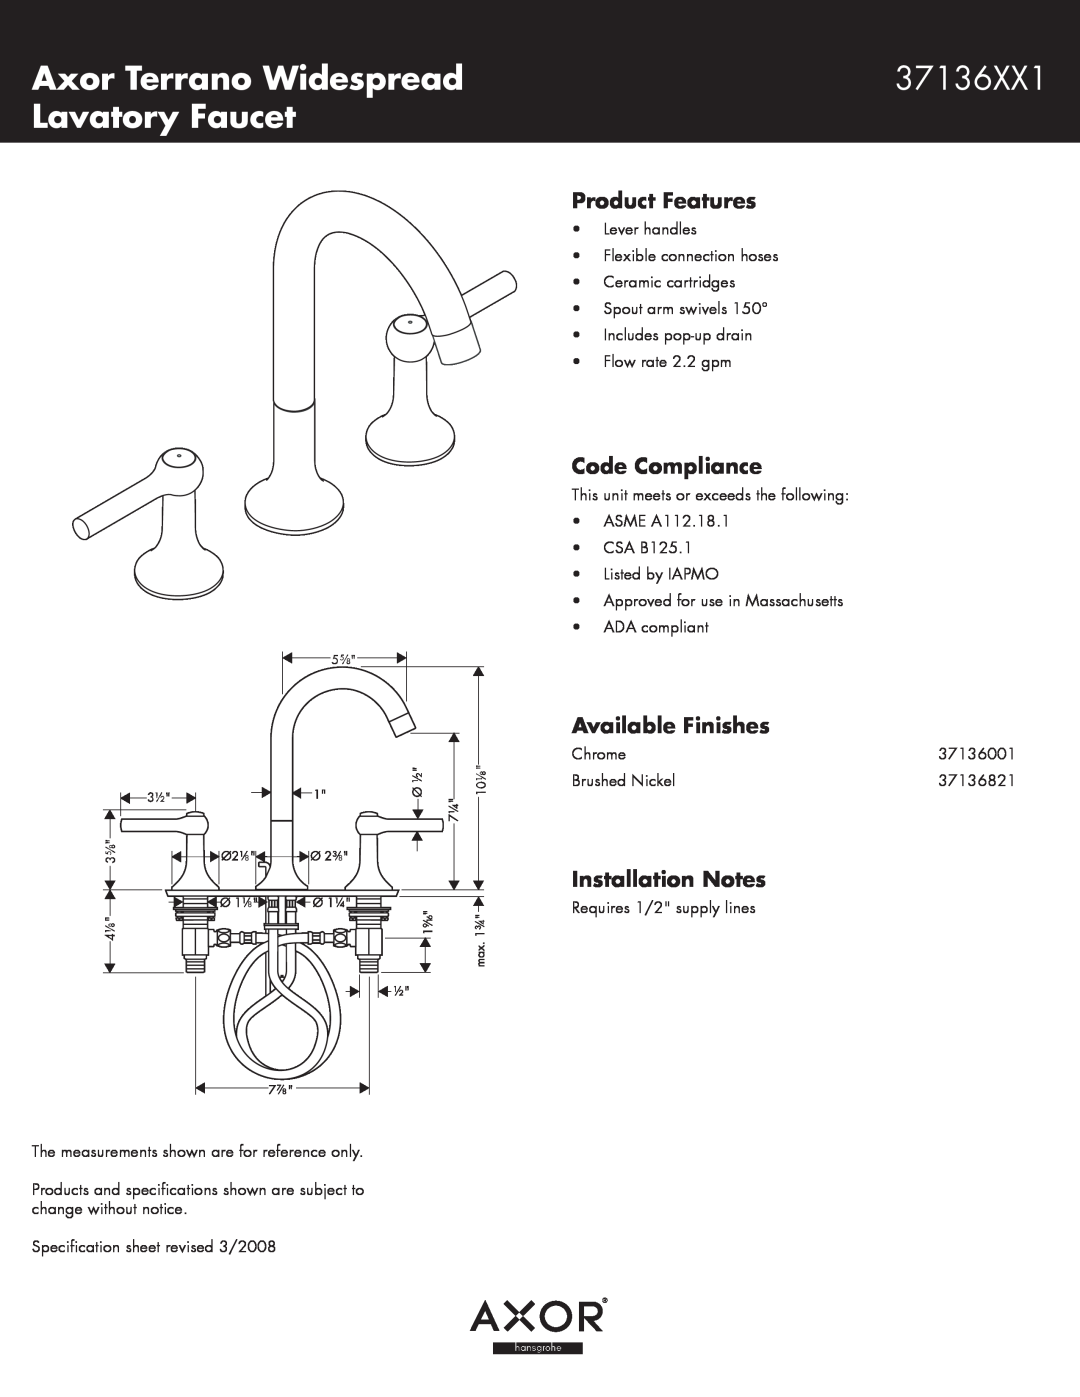 Axor 37136821 specifications Axor Terrano Widespread, 37136XX1, Lavatory Faucet, Product Features, Code Compliance 